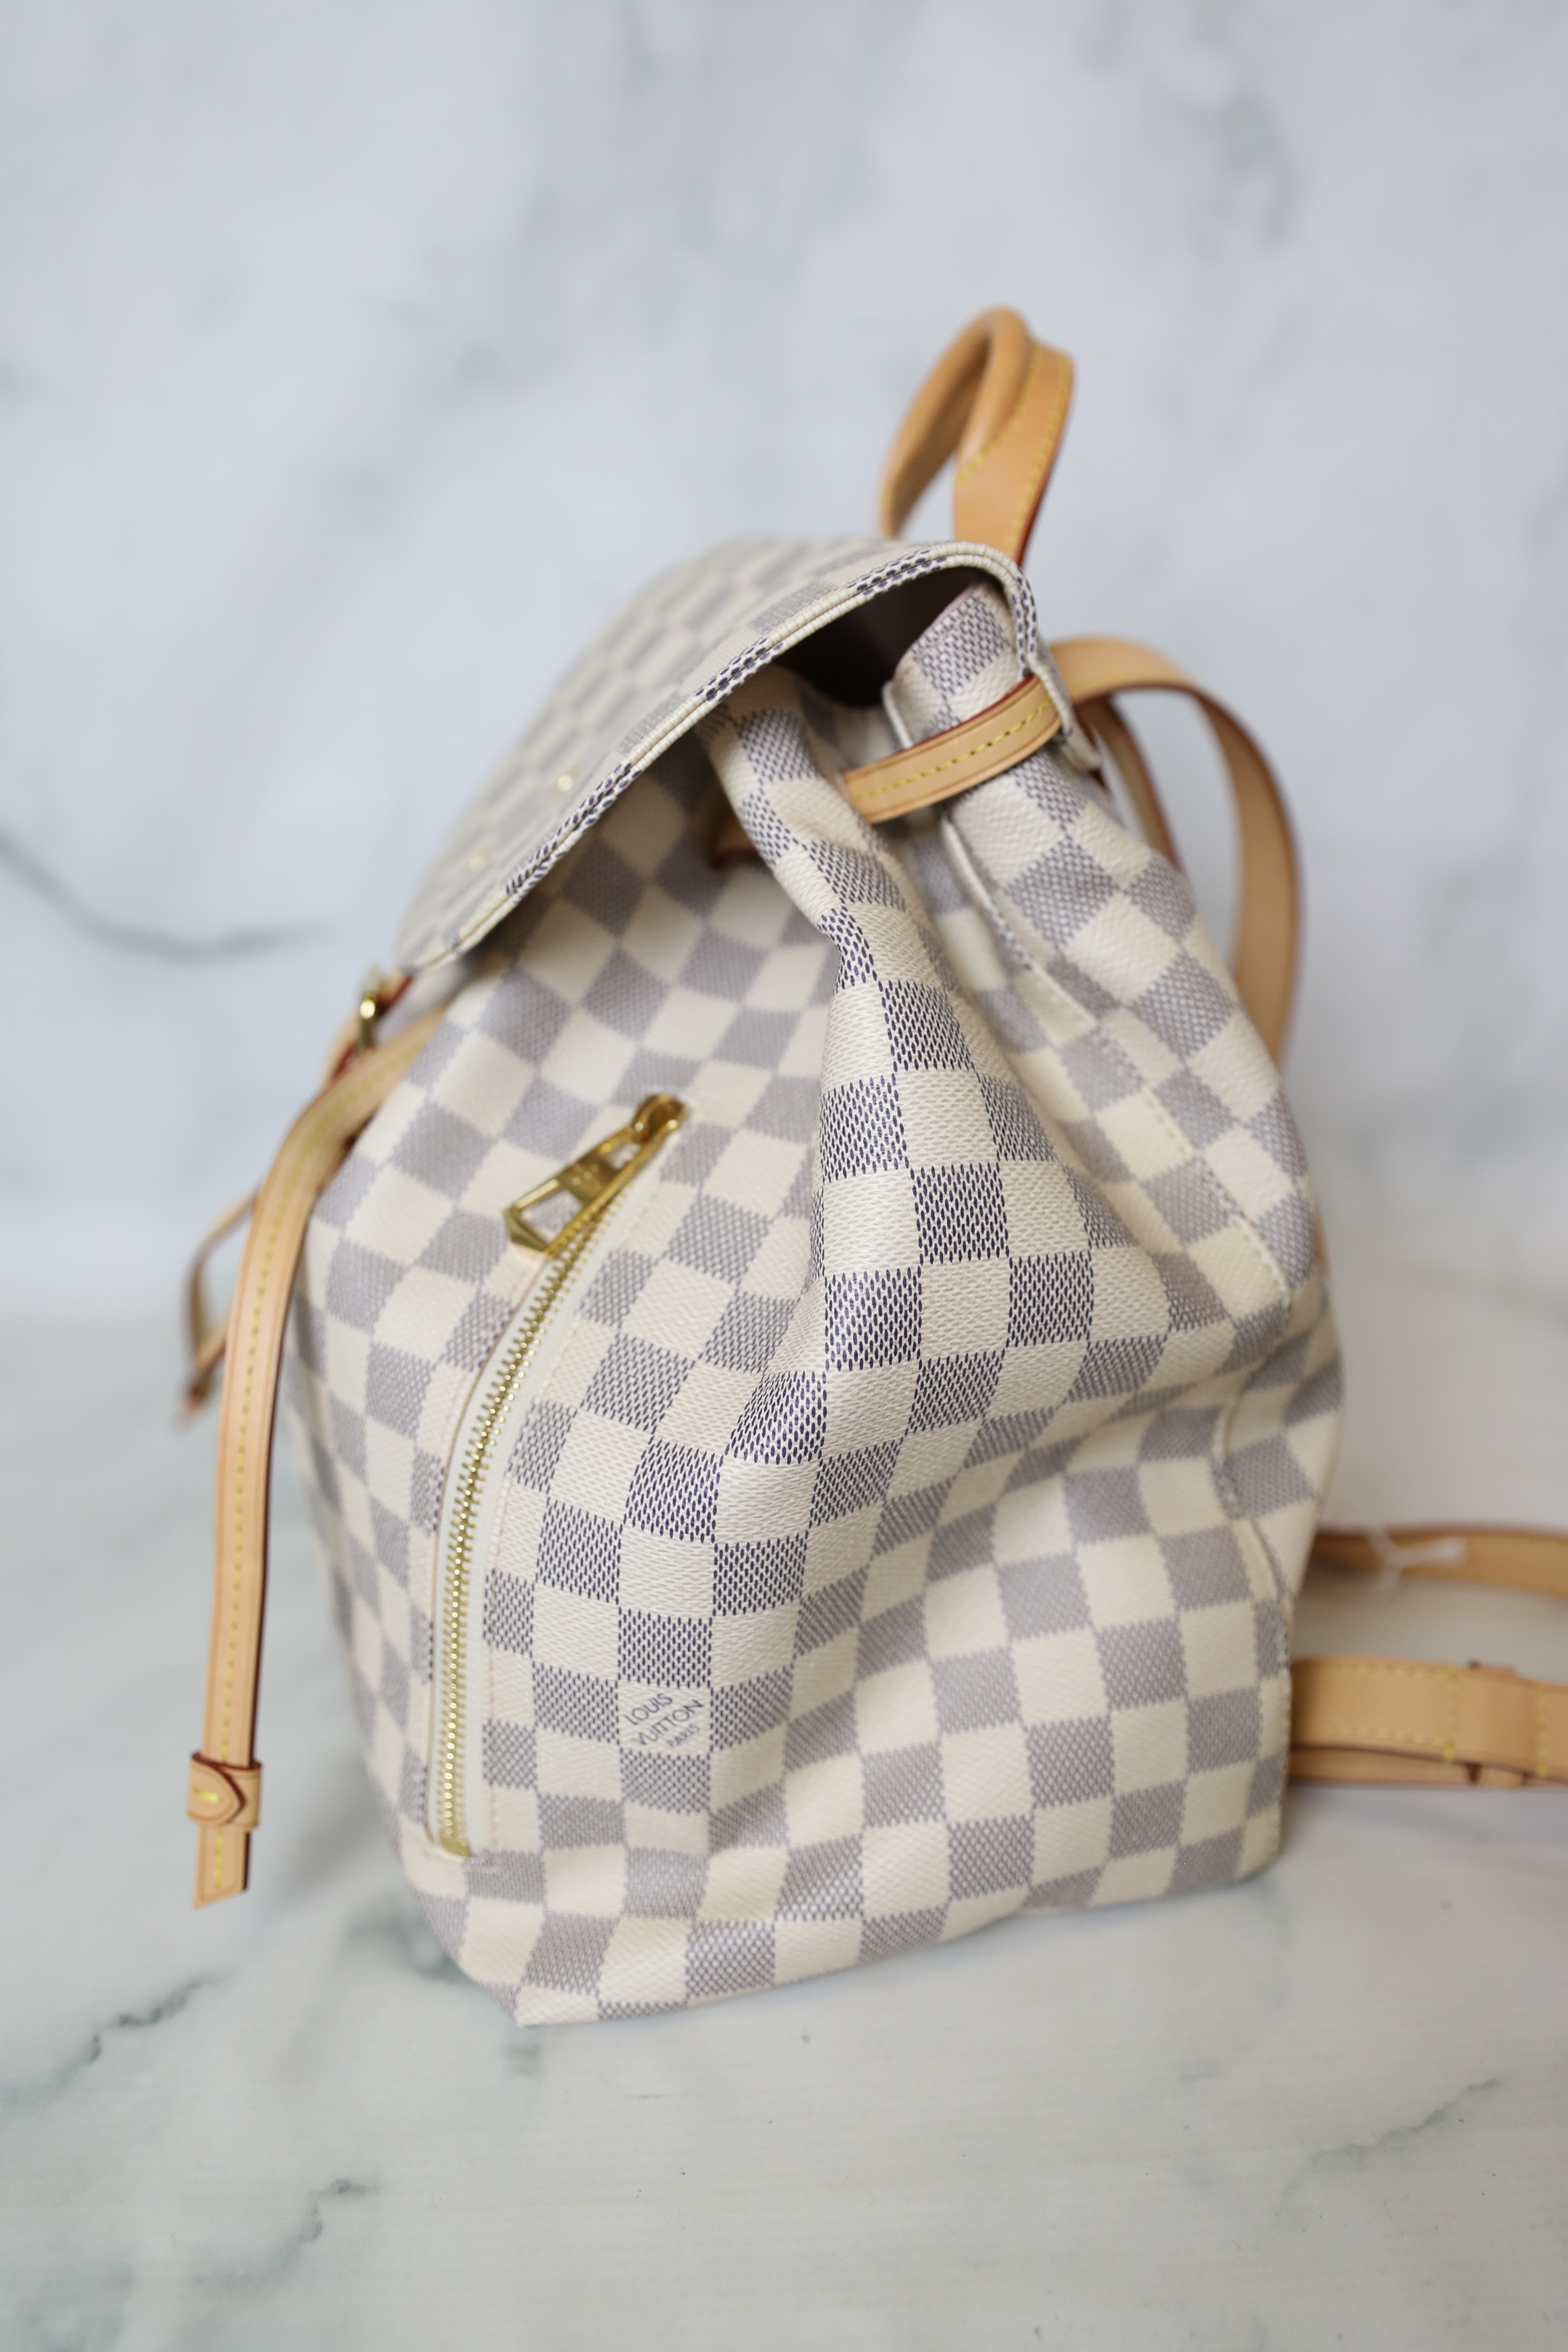 LOUIS VUITTON Damier Azur Sperone Backpack USED - MyDesignerly